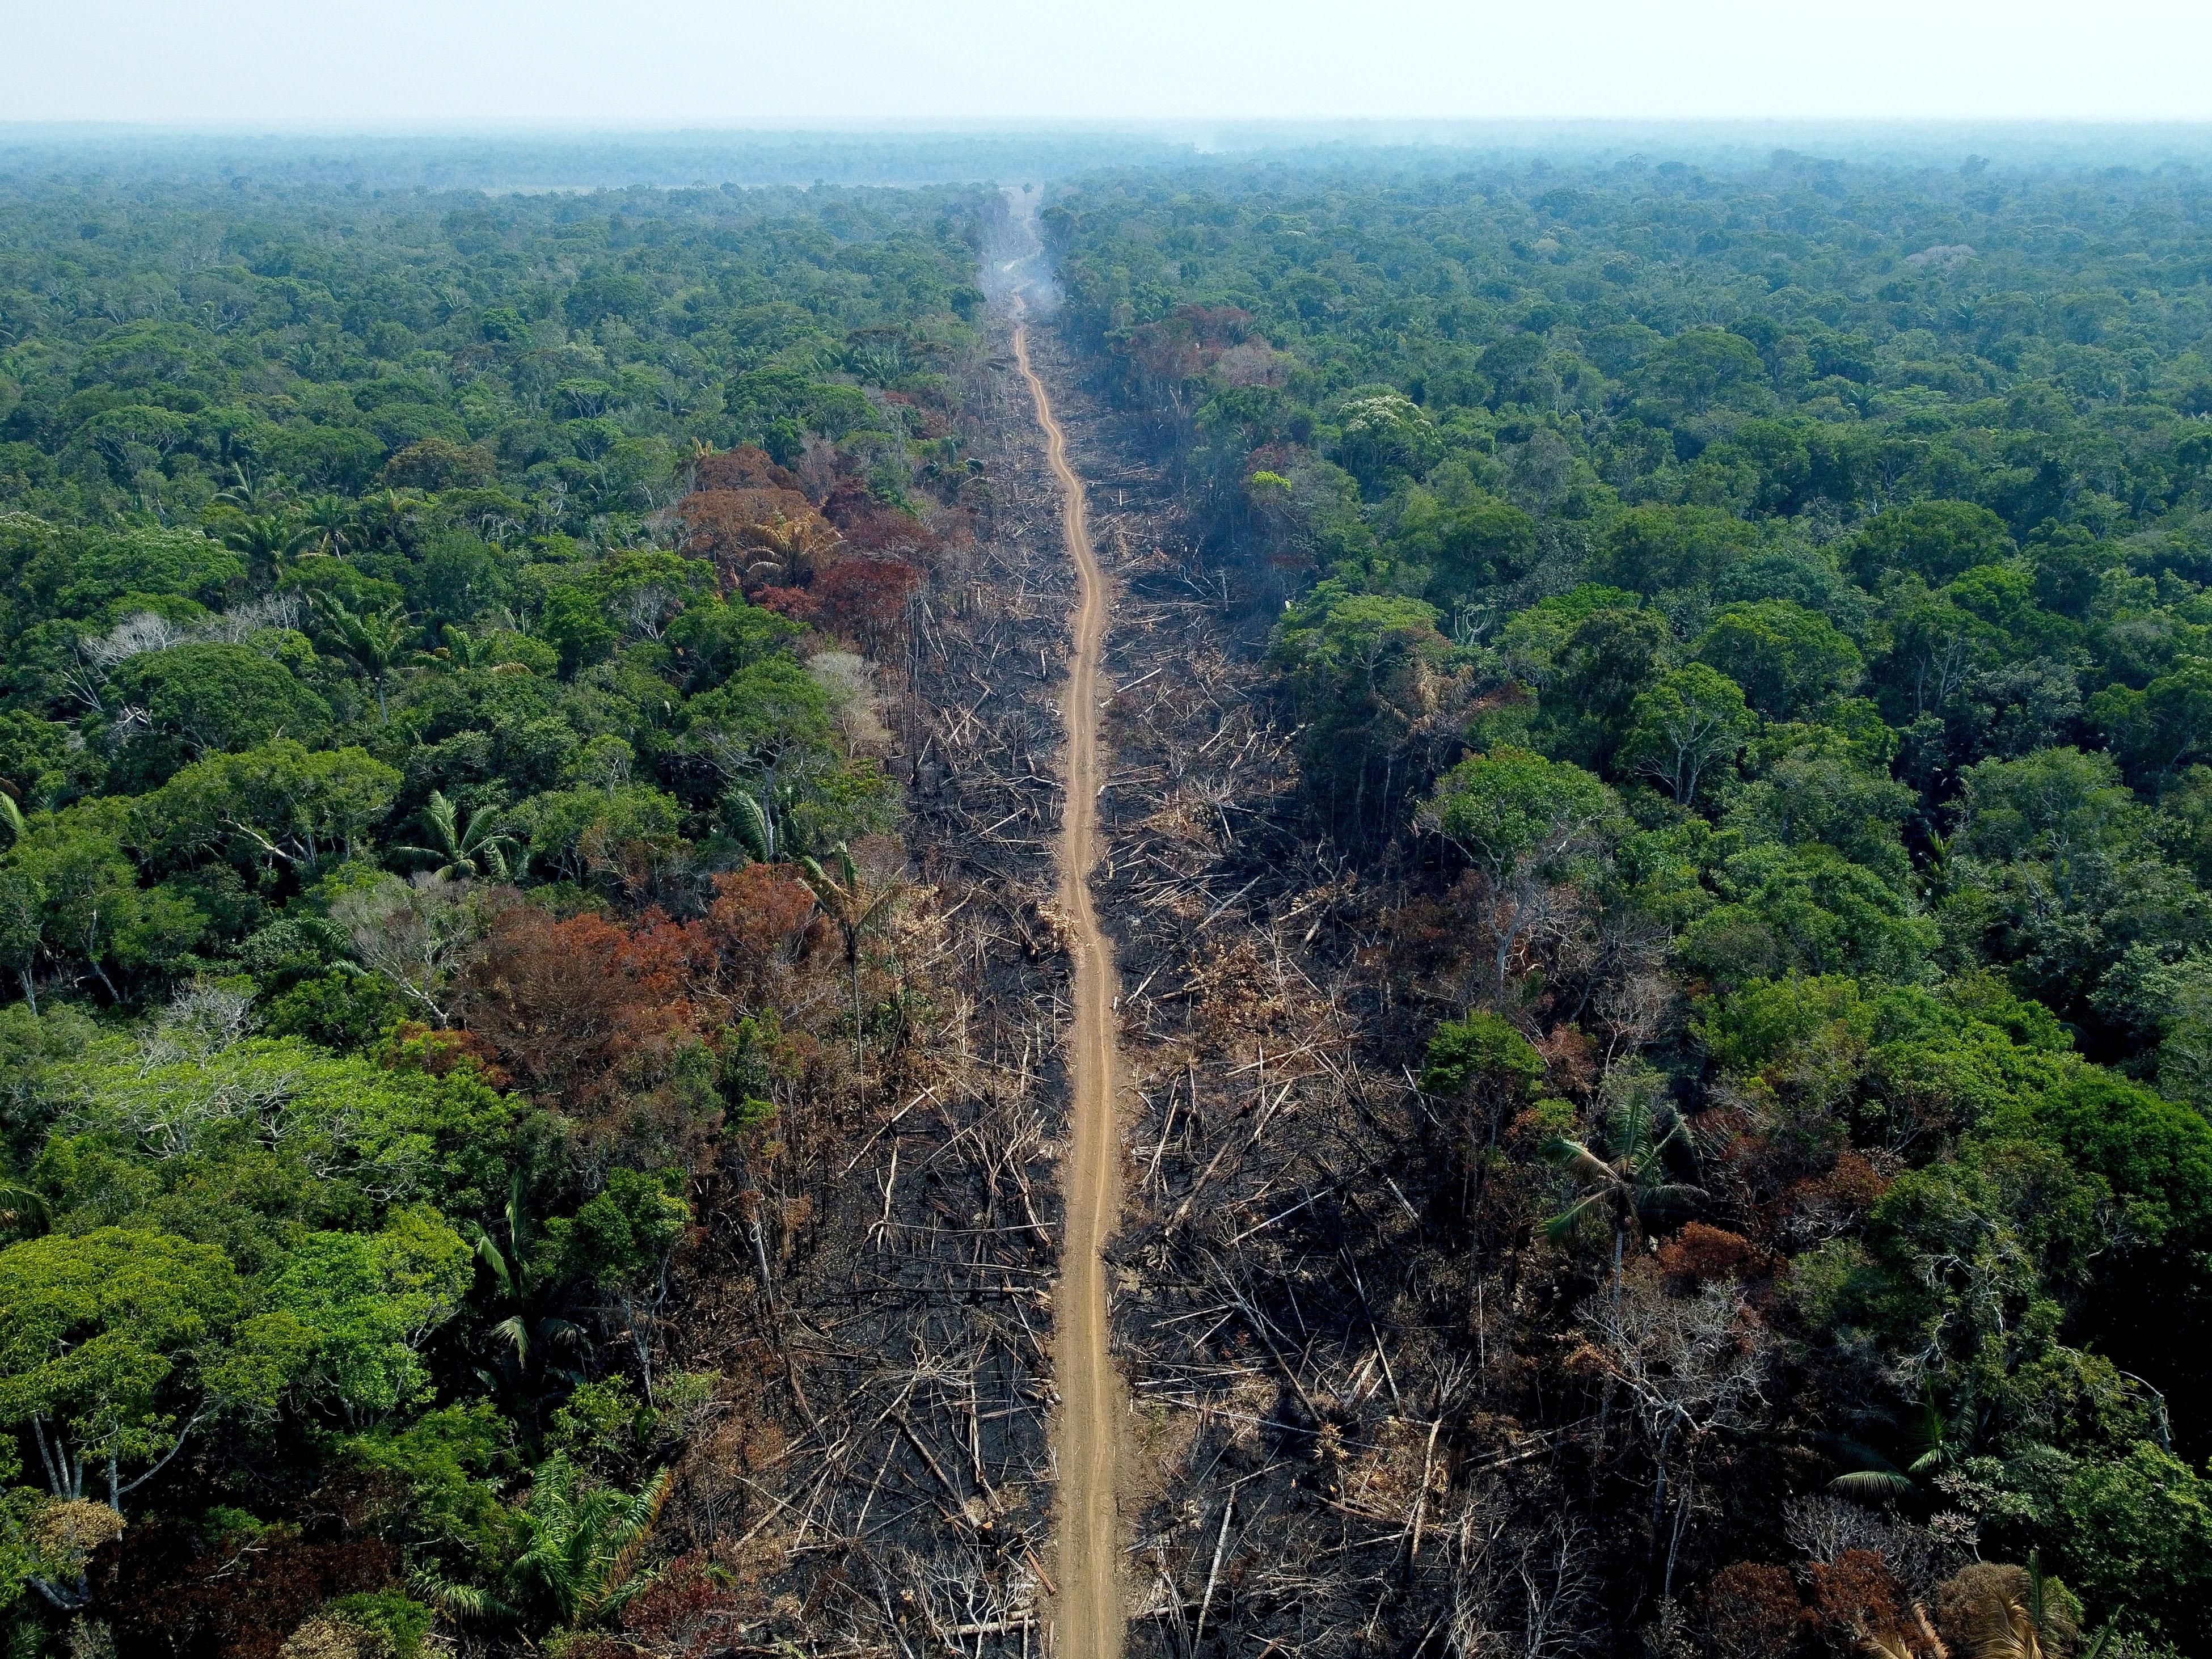 A deforested and burnt area is seen on a stretch of the BR-230 Transamazonian Highway in Humaitá, Amazonas State, Brazil, on September 16, 2022.